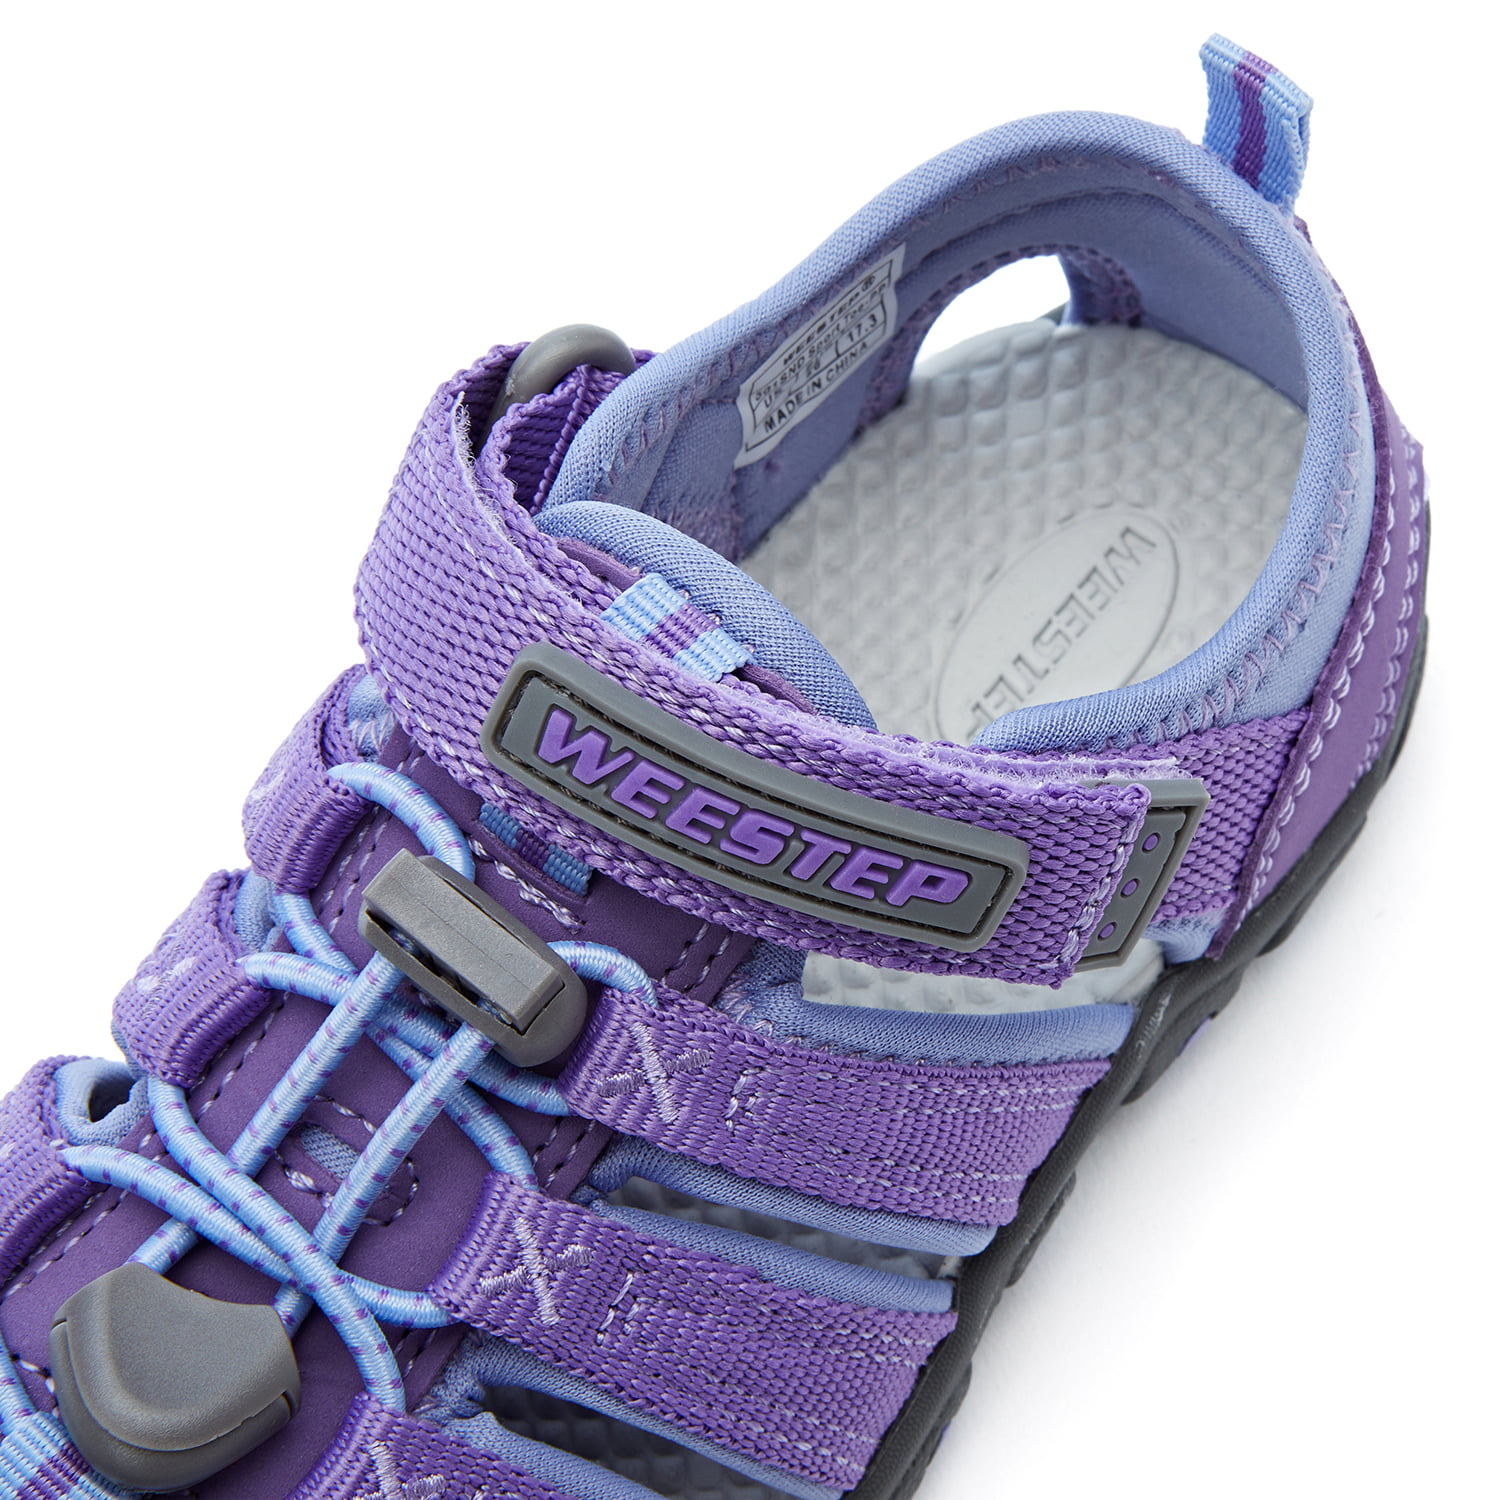 Weestep Boys and Girls Closed Toe Quick Dry Beach Hiking Sandal 